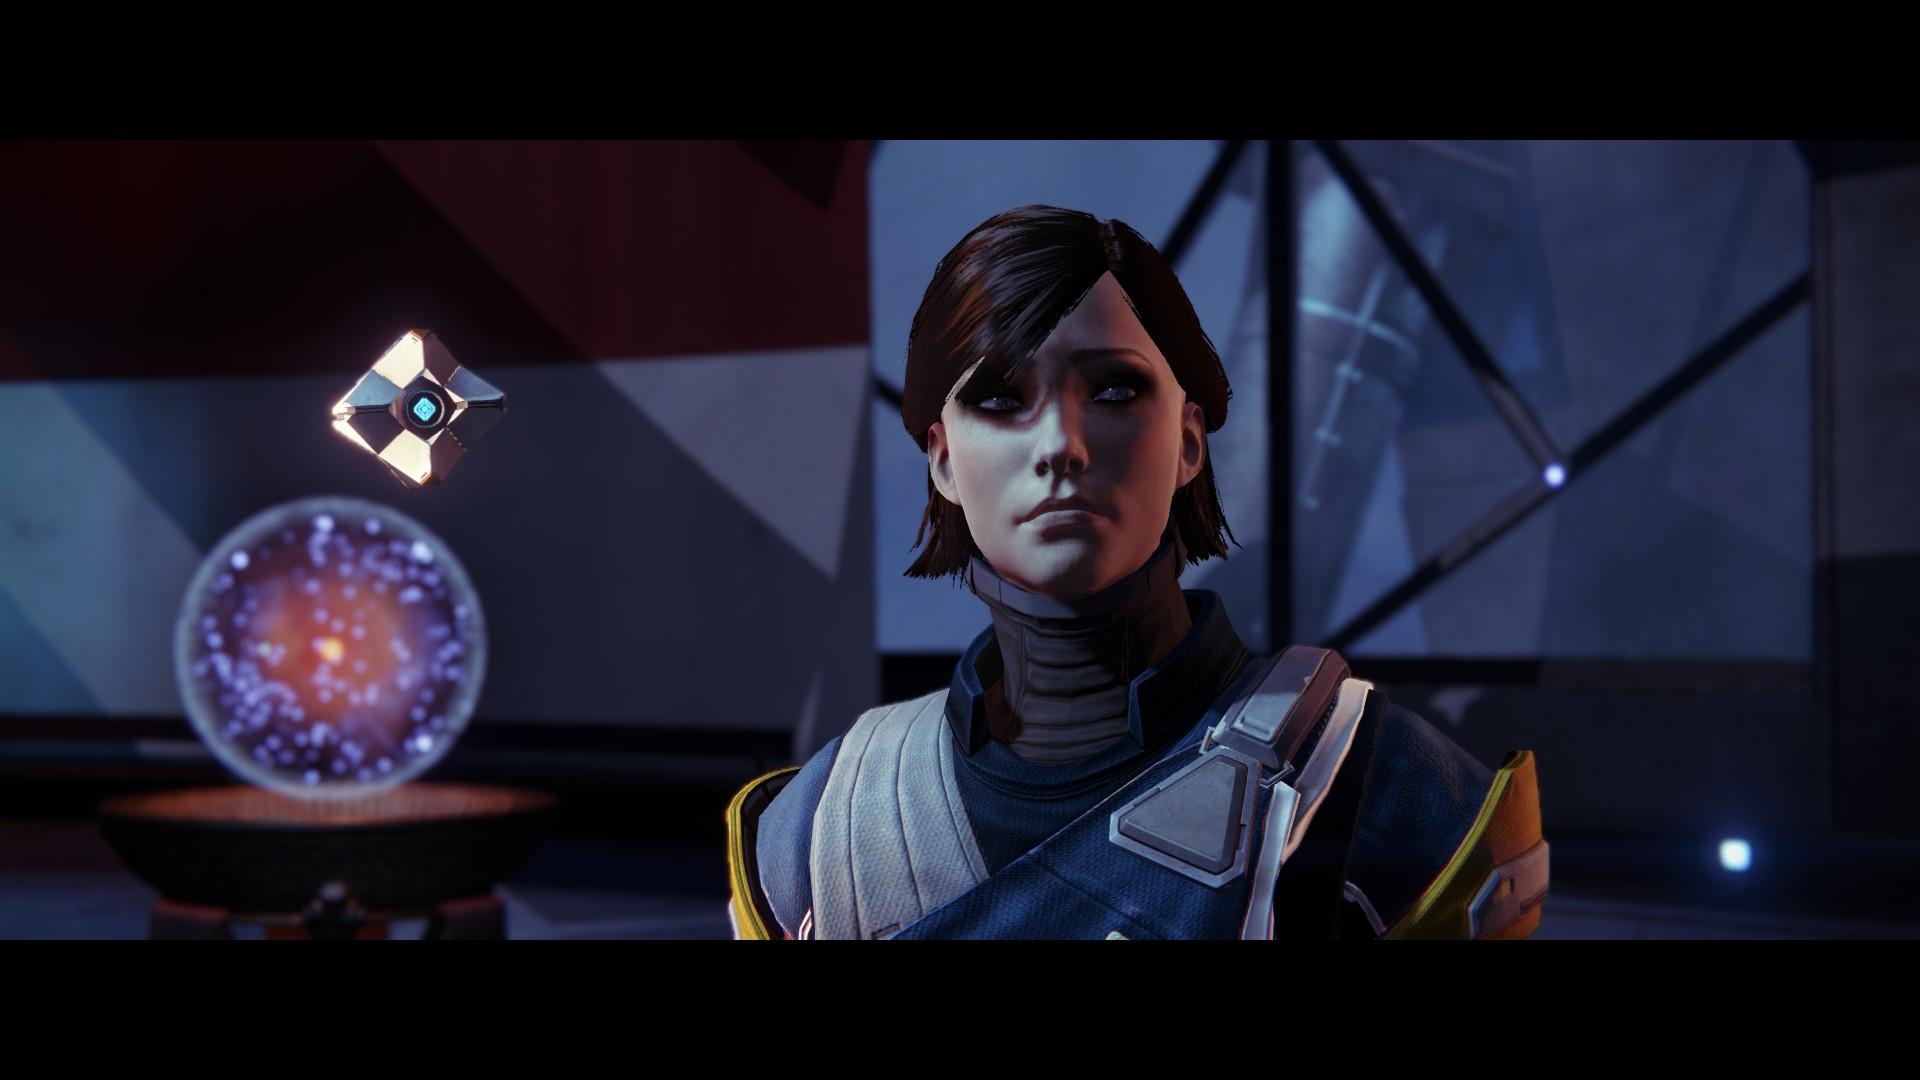 Destiny Human Female Hairstyles From Behind
 What does your Destiny character look like NeoGAF